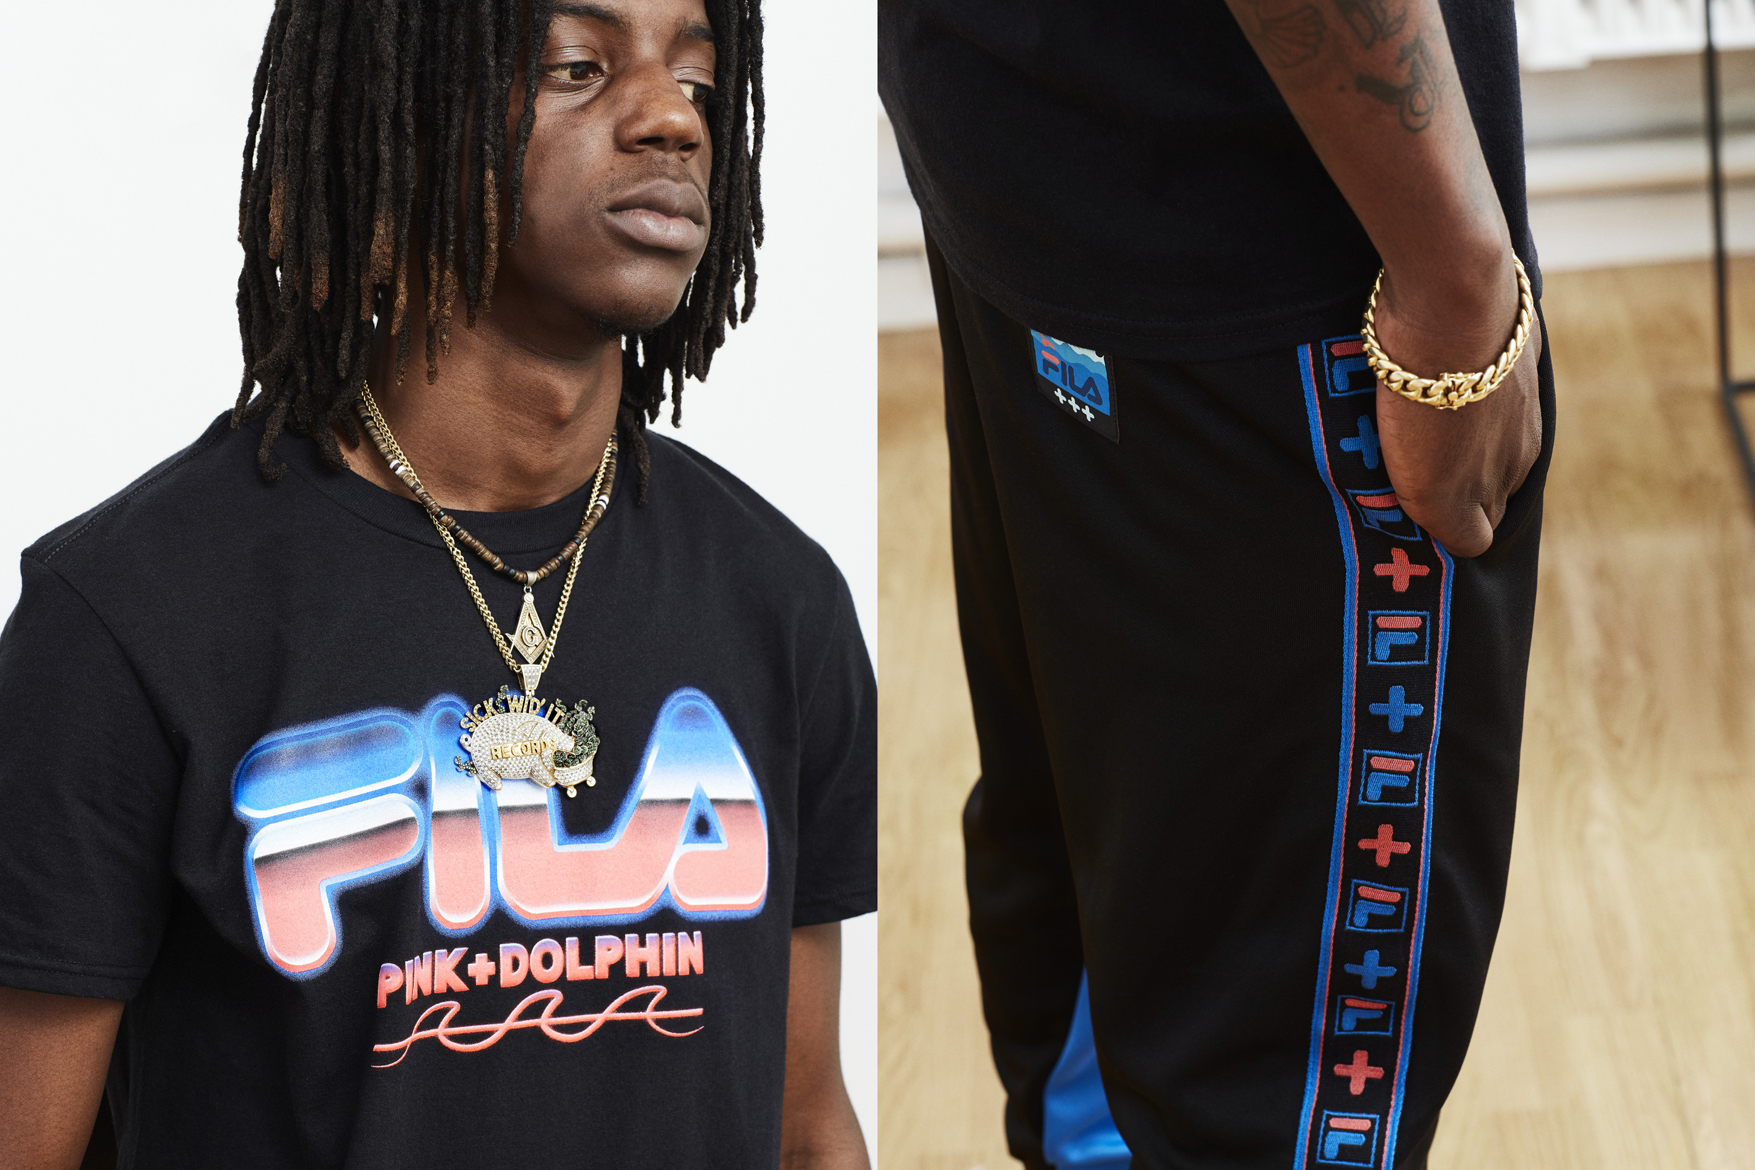 FILA and Pink Dolphin apparel 3